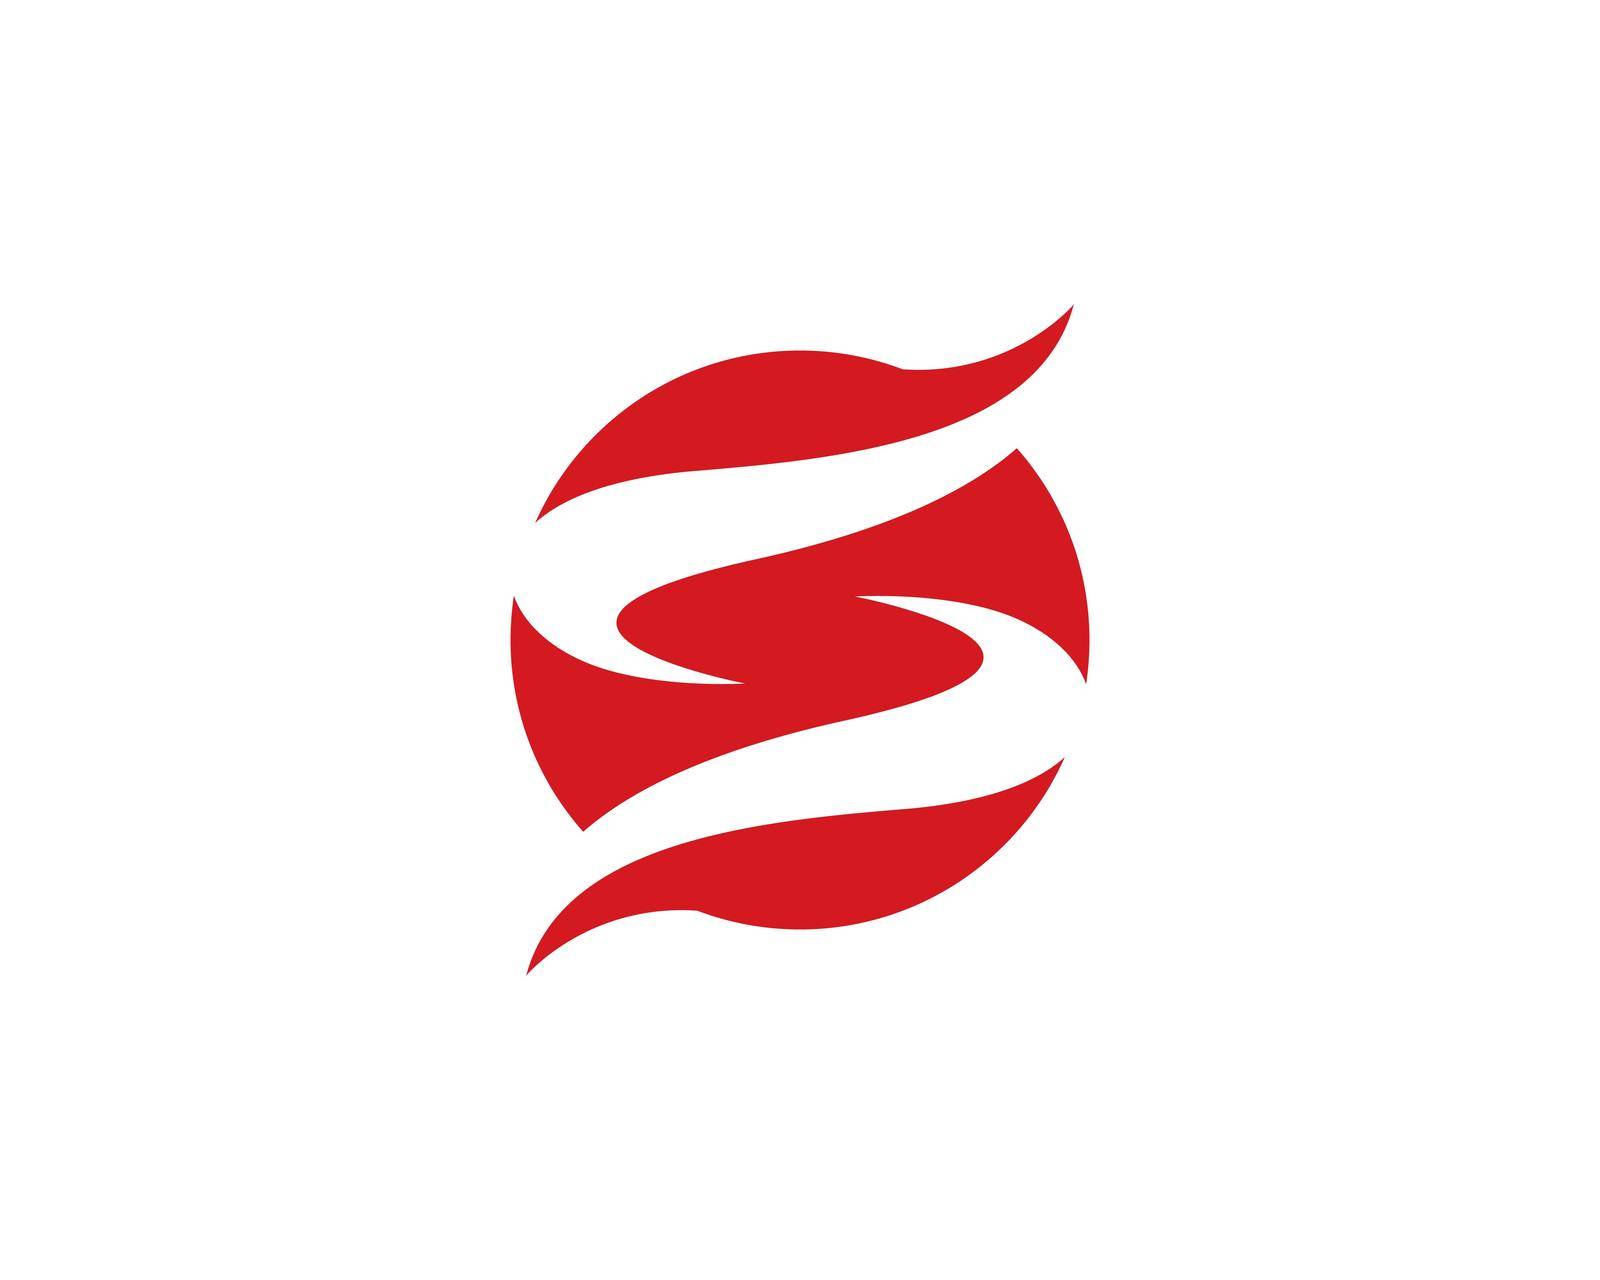 S letter logo by awk